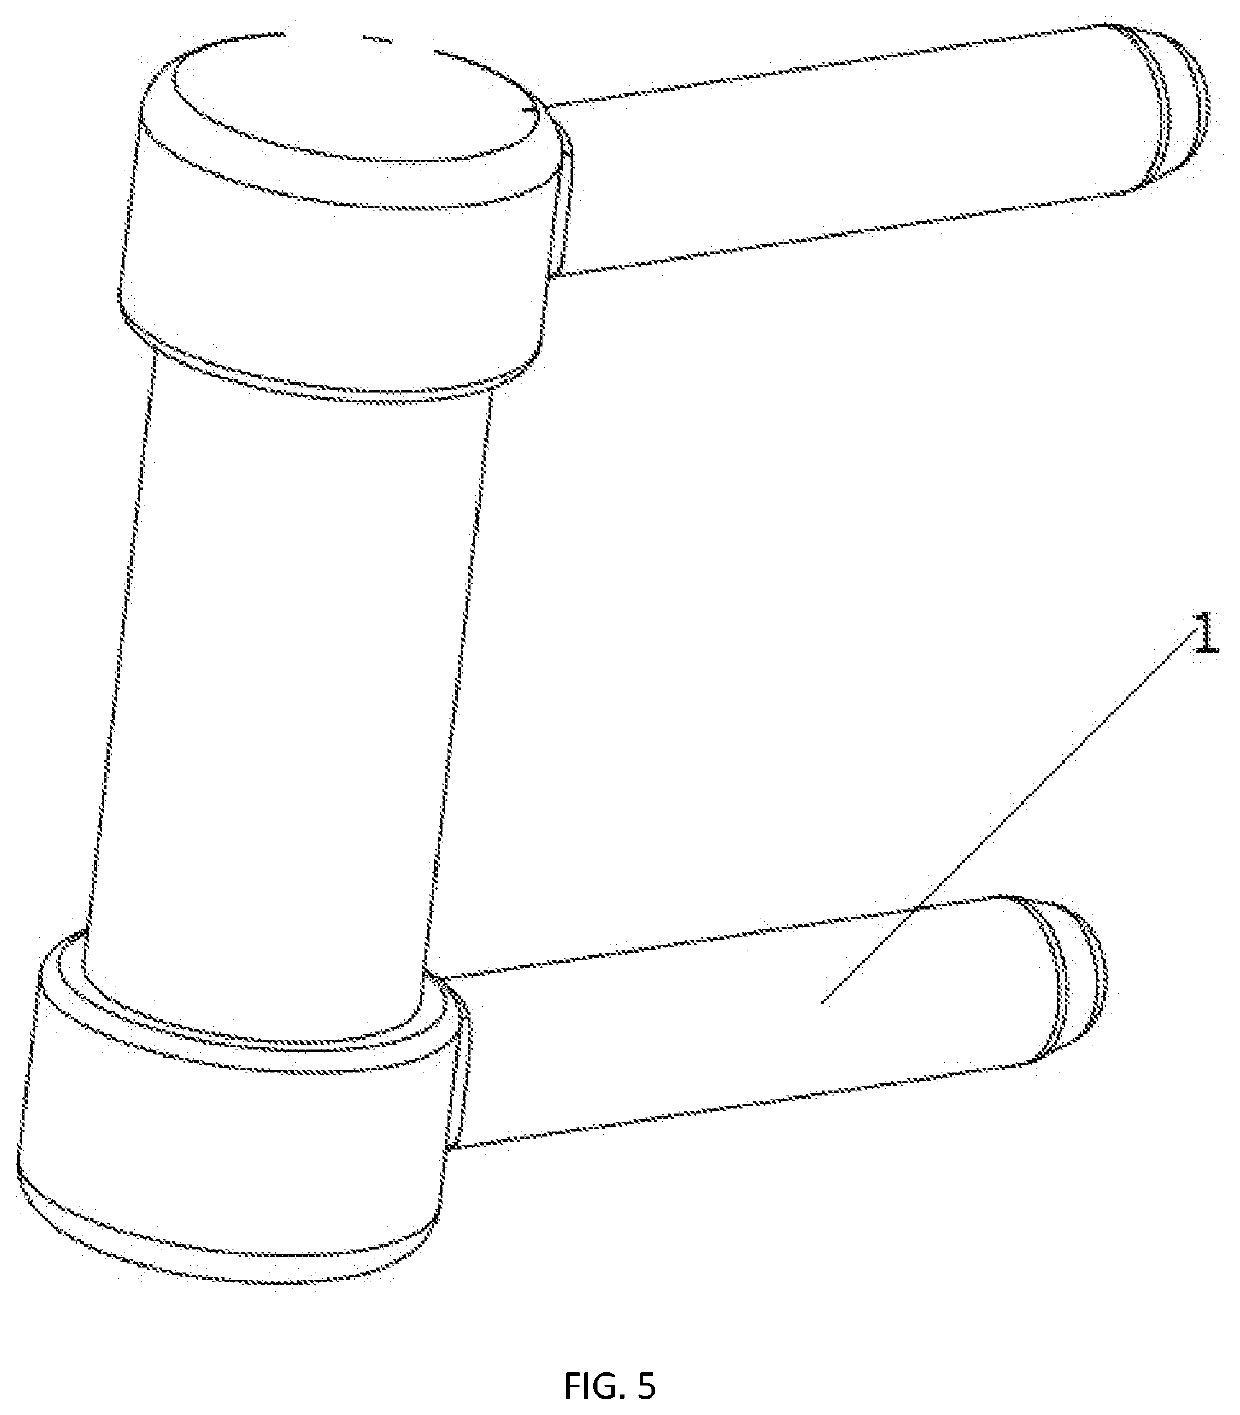 Combined semi-limiting multipolar artificial wrist joint